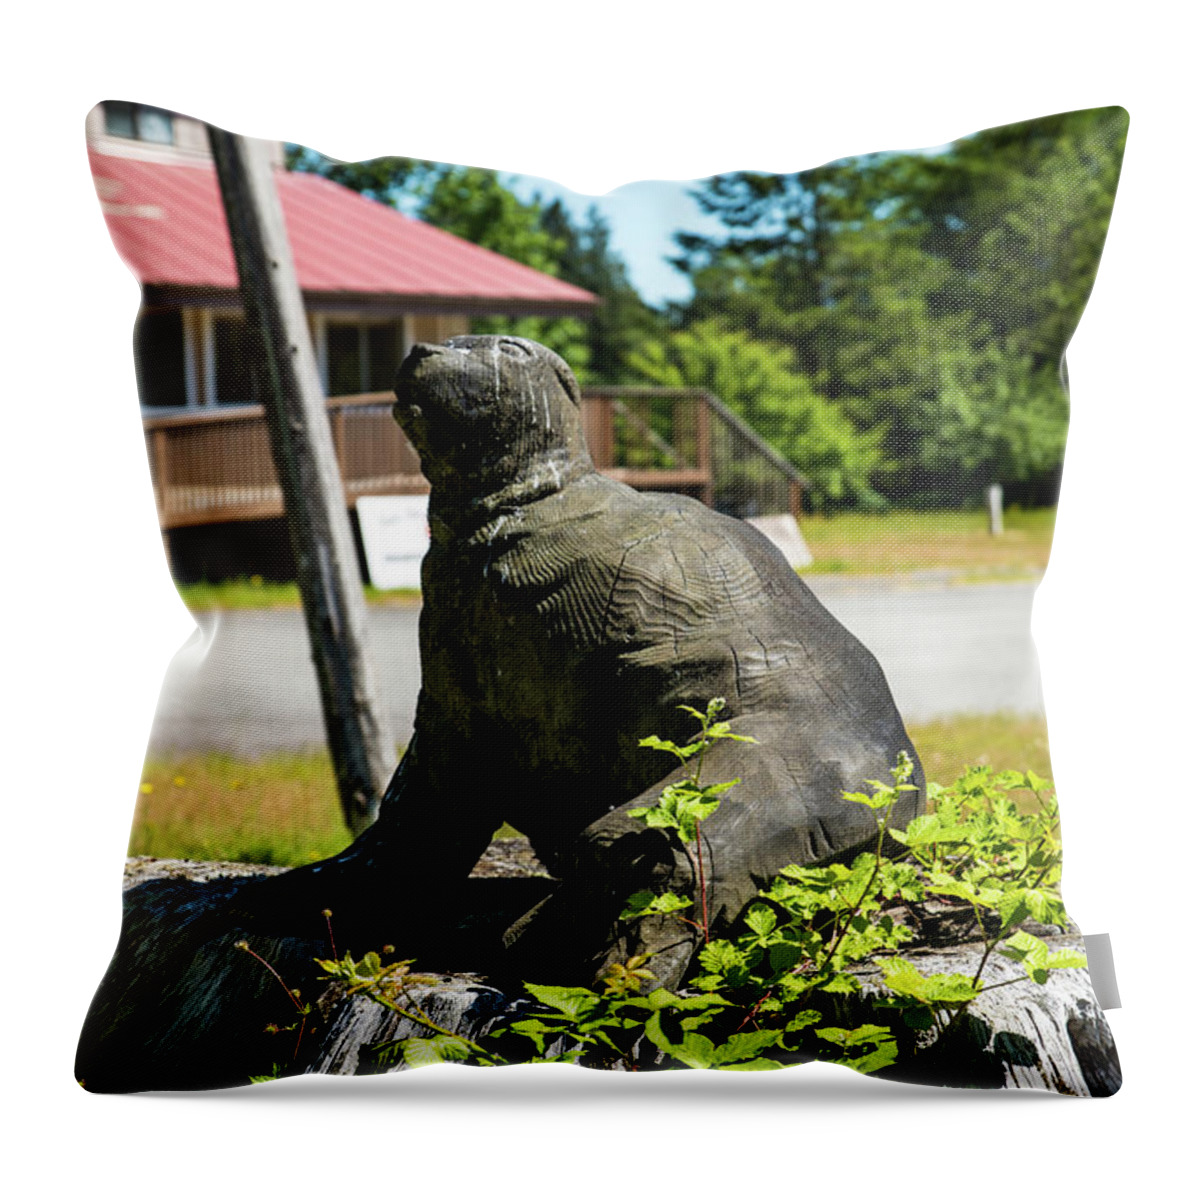 Wood Sea Lion Throw Pillow featuring the photograph Wood Sea Lion by Tom Cochran